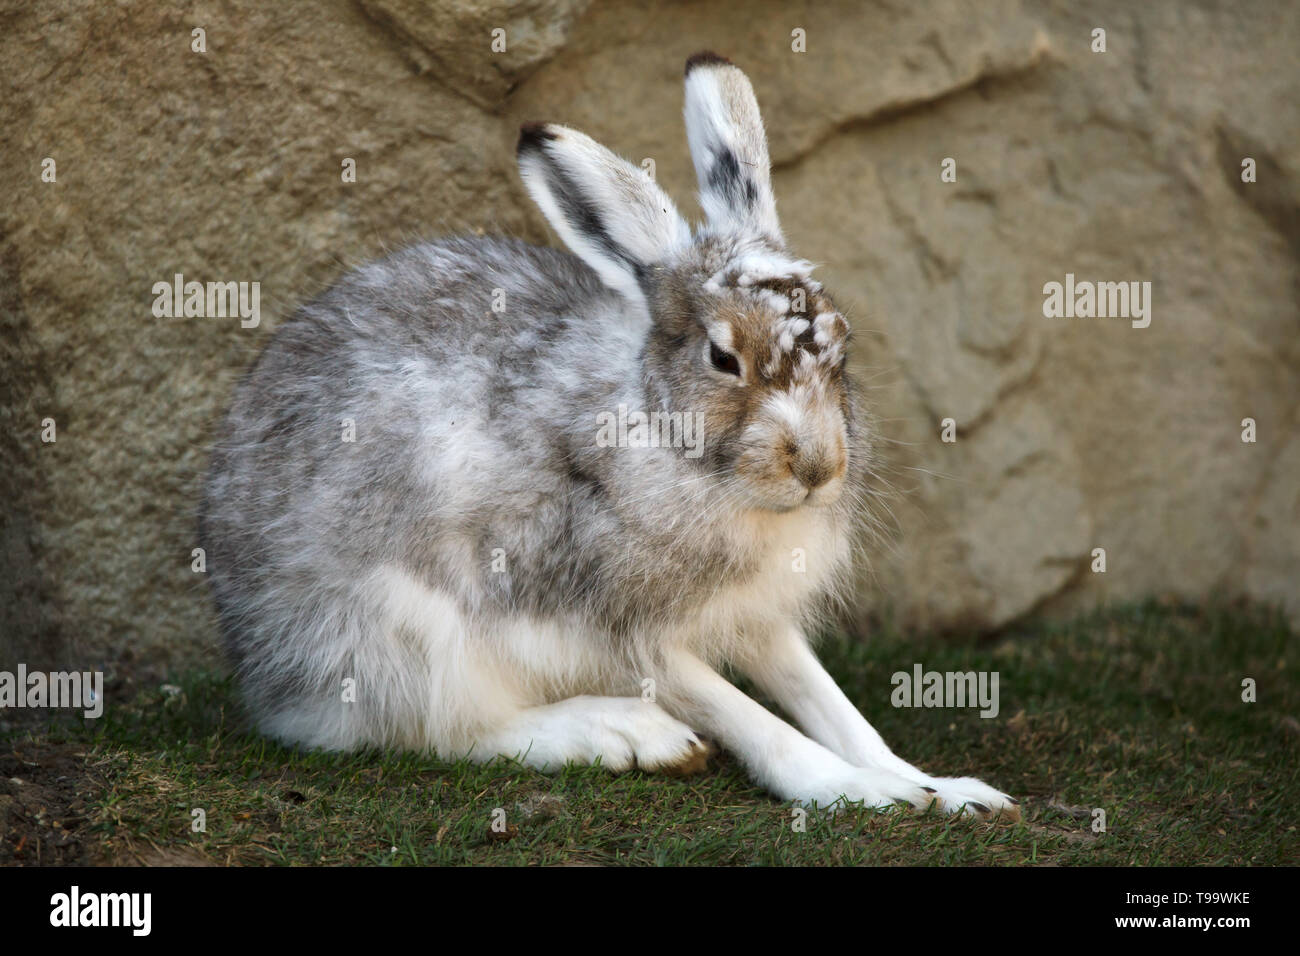 Mountain hare (Lepus timidus), also known as the white hare. Stock Photo